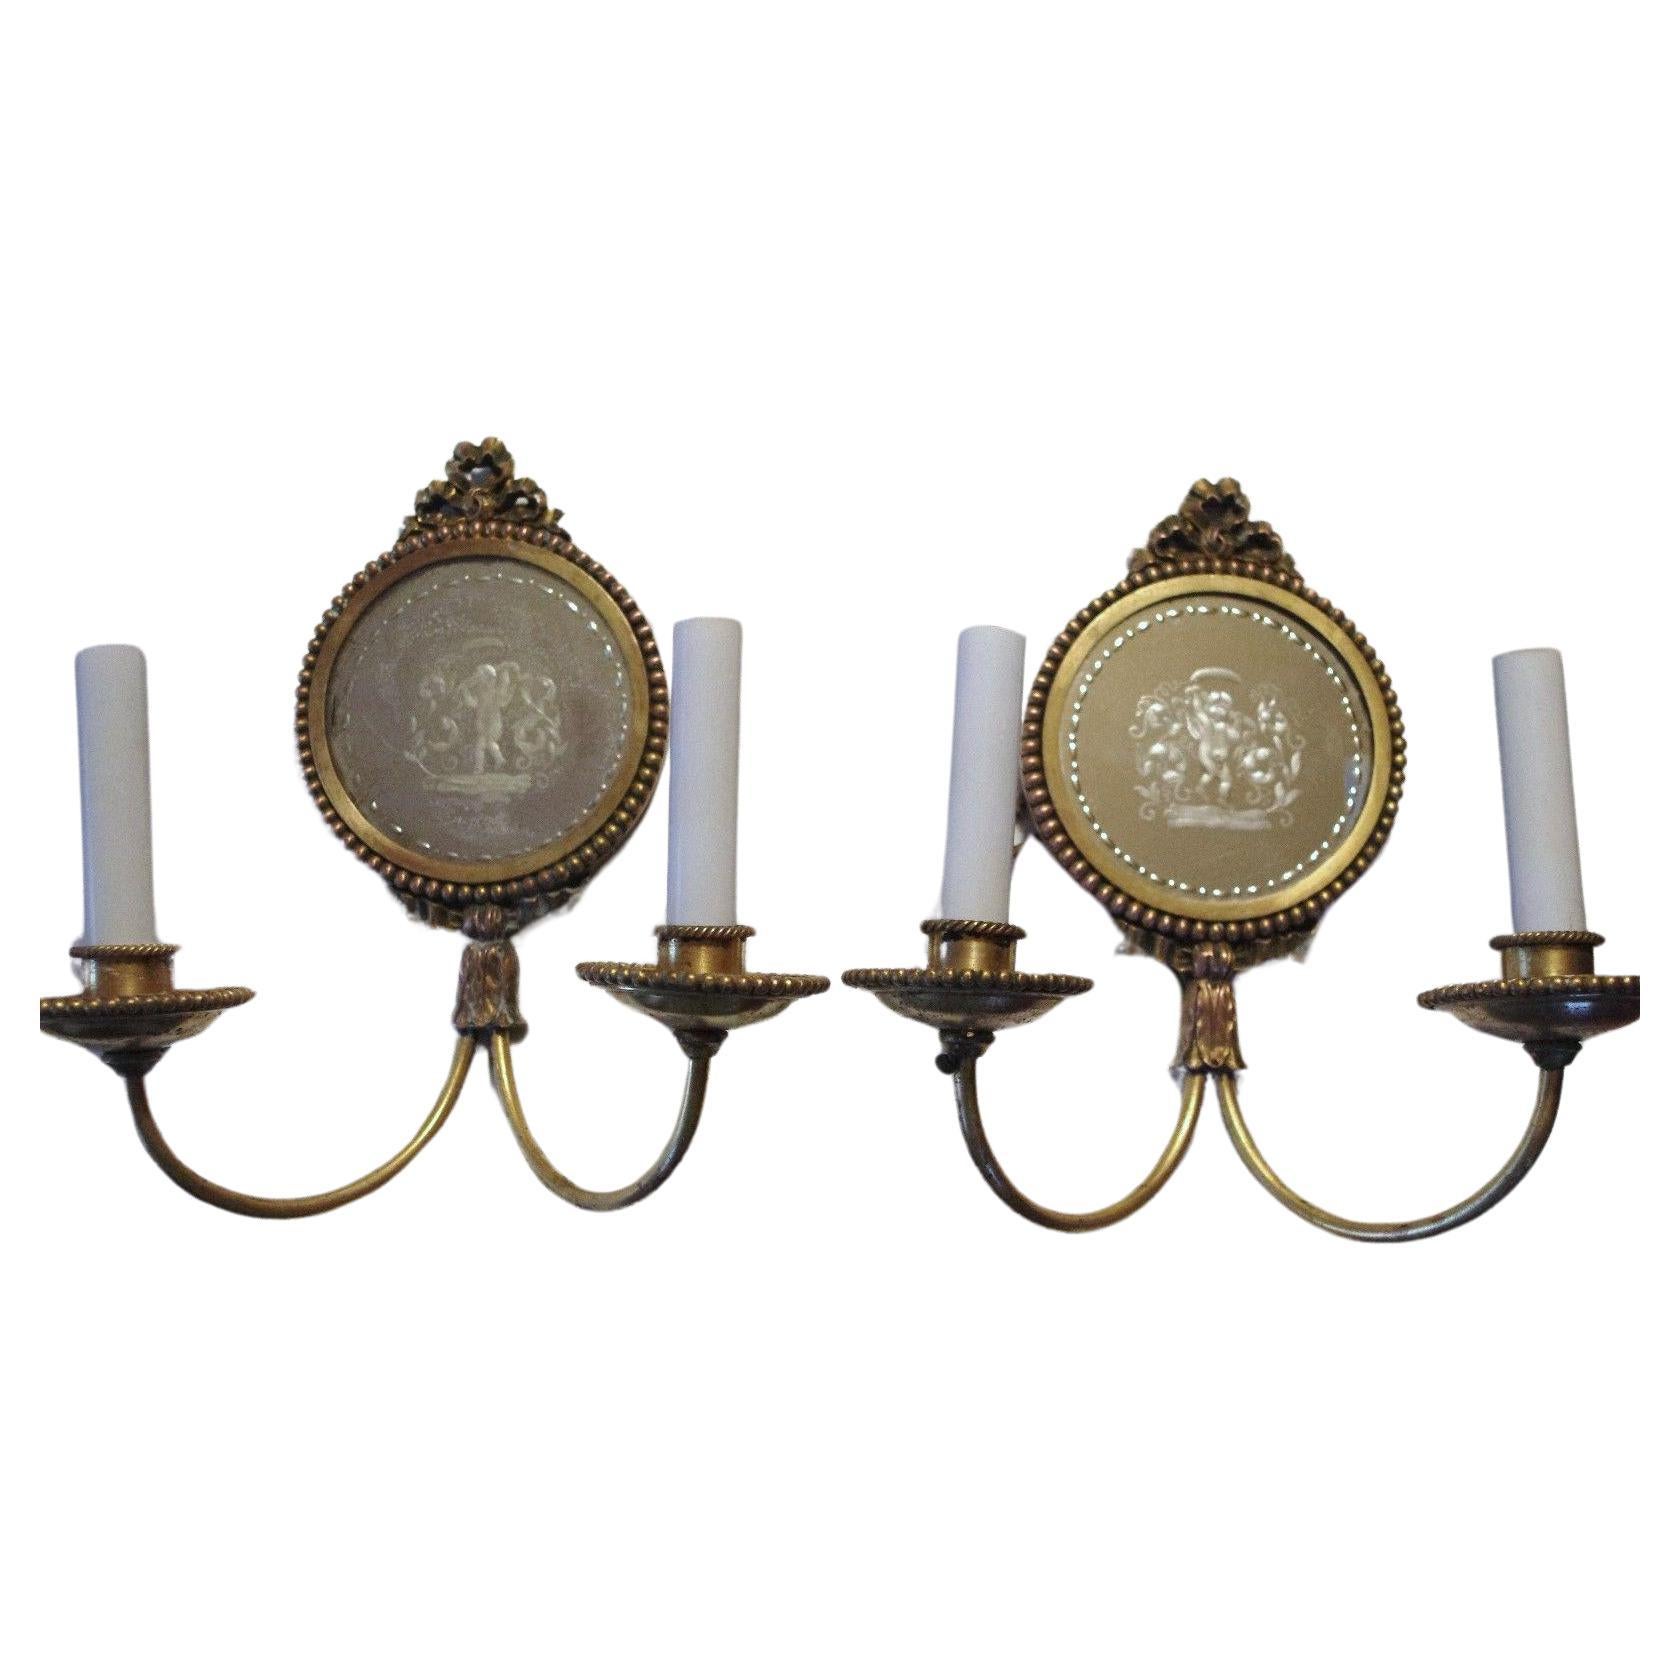 Pair 19thc Neoclassic Bronzw/Eglomise Cherubs Cavorting Wall Sconces by Caldwell